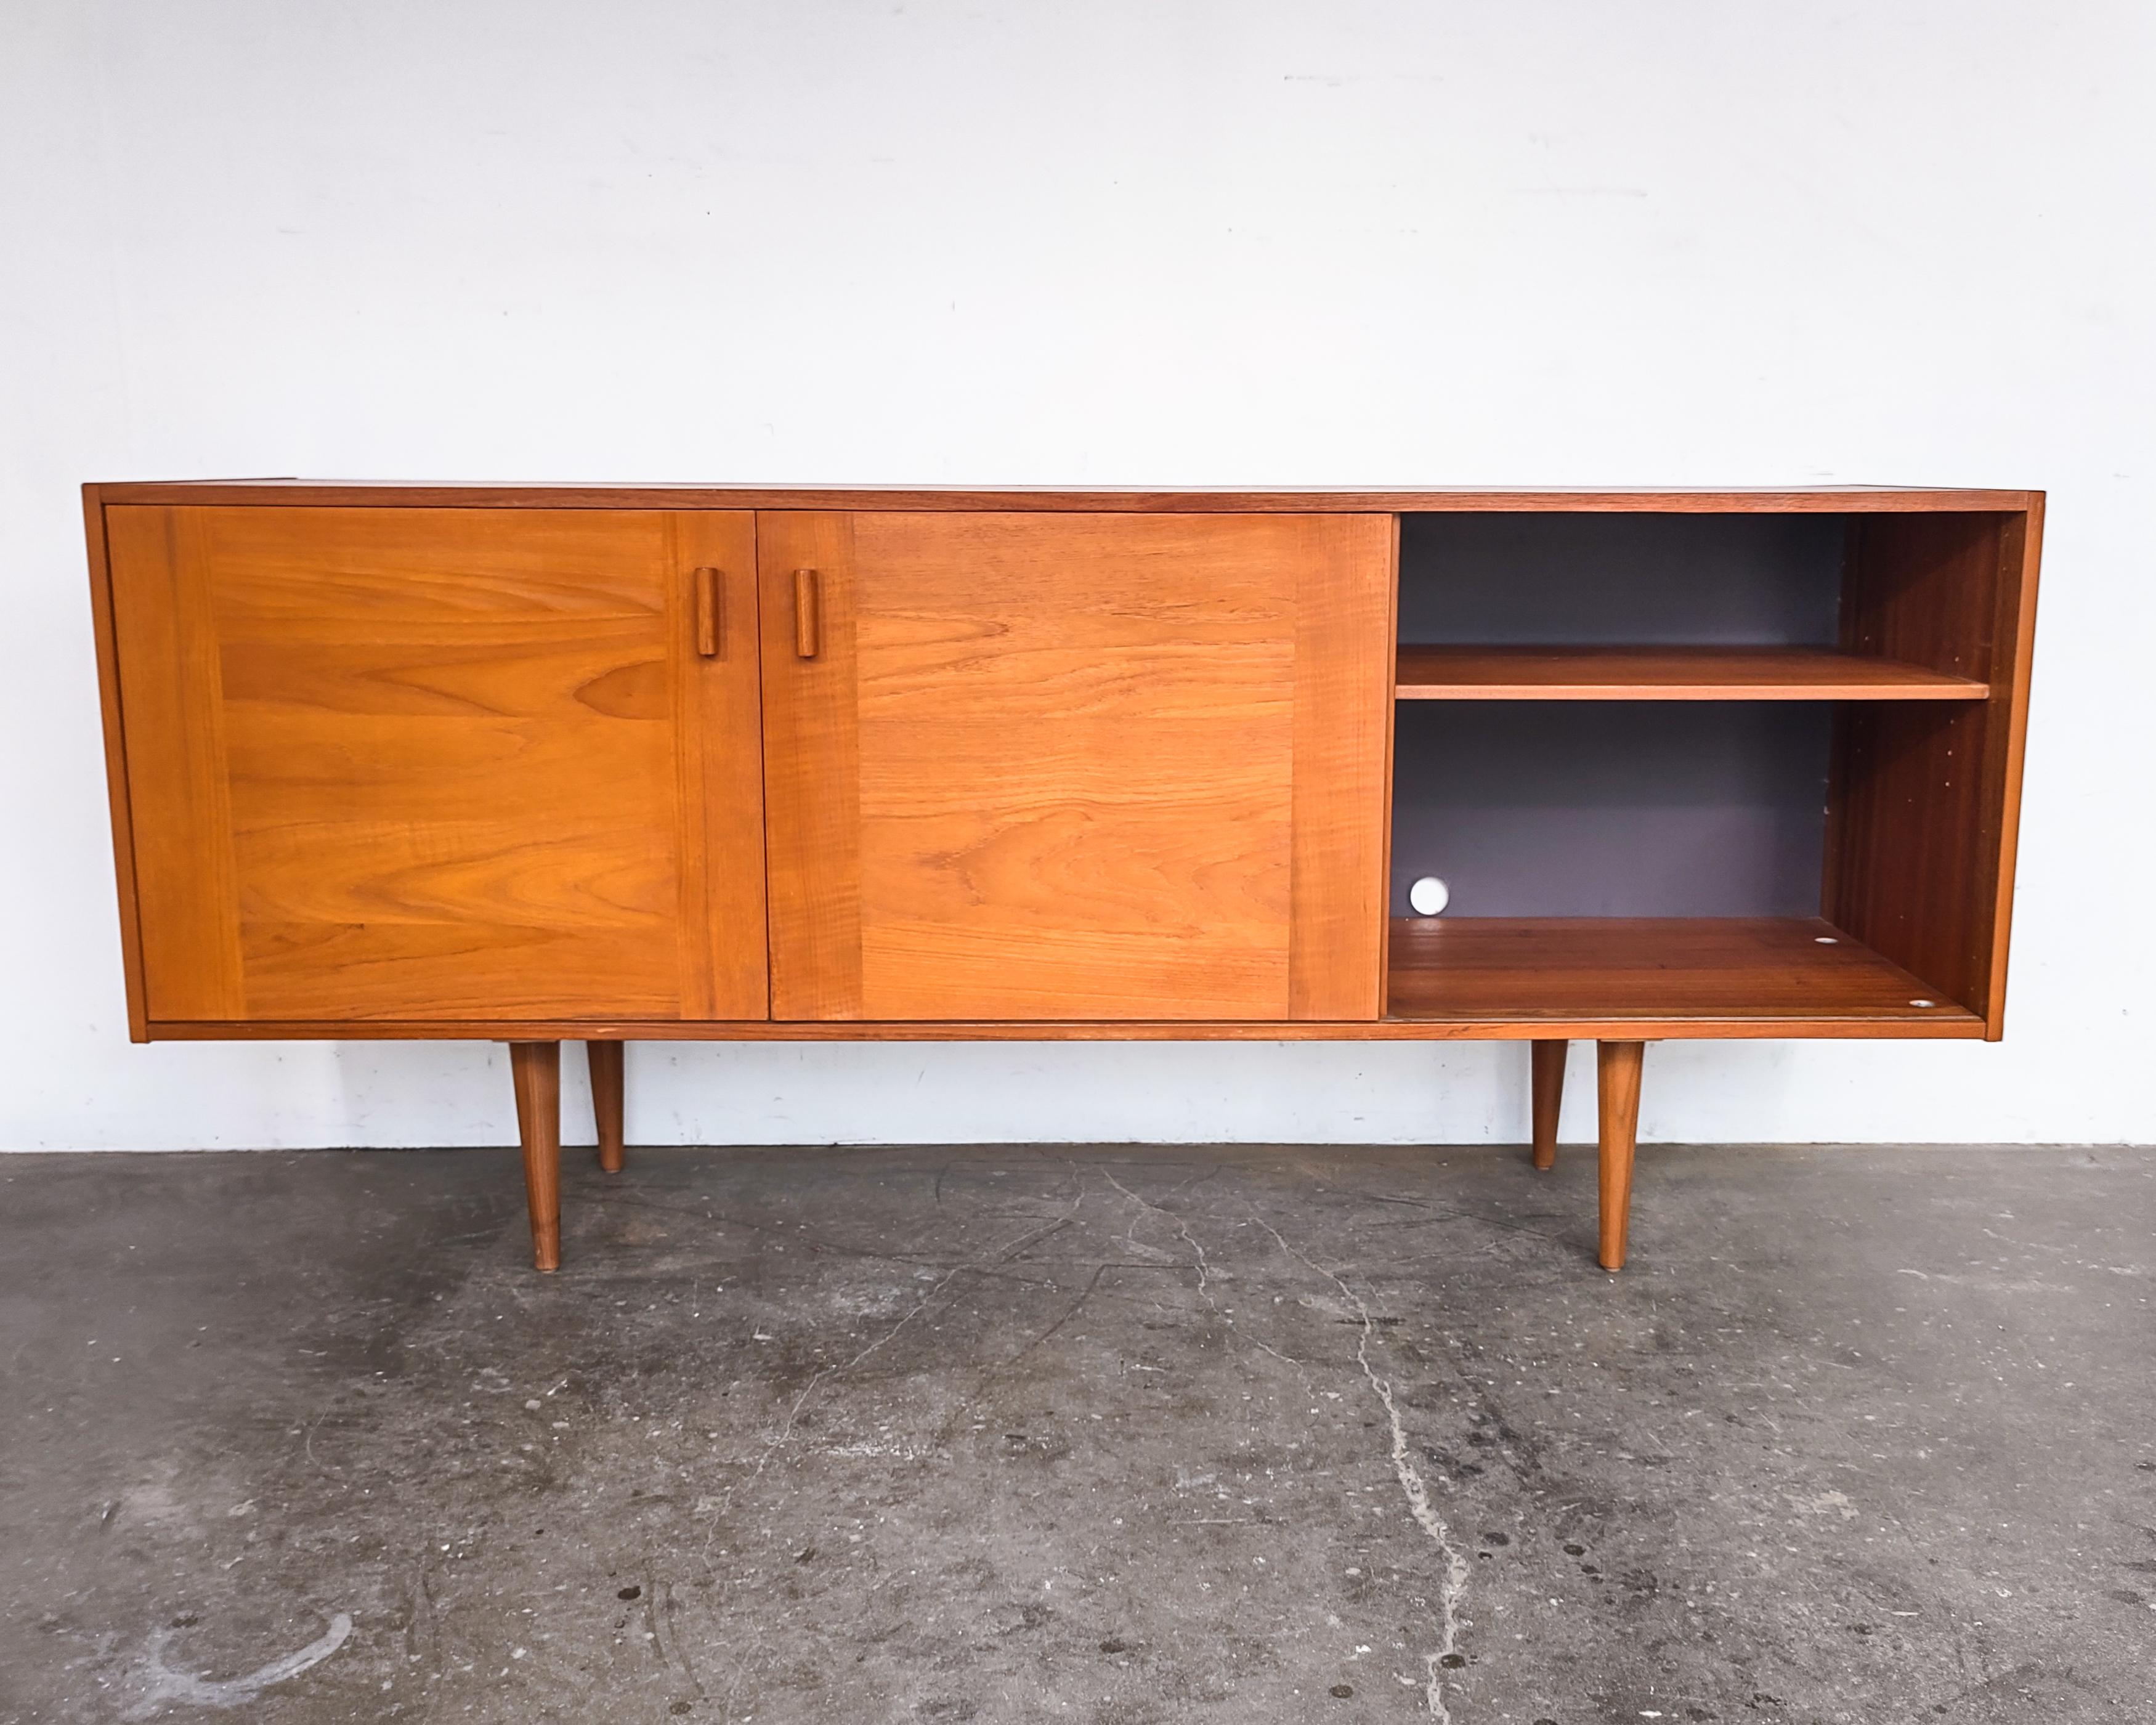 Mid-20th Century Mid-Century Teak Credenza with Sliding Doors by Domino Møbler